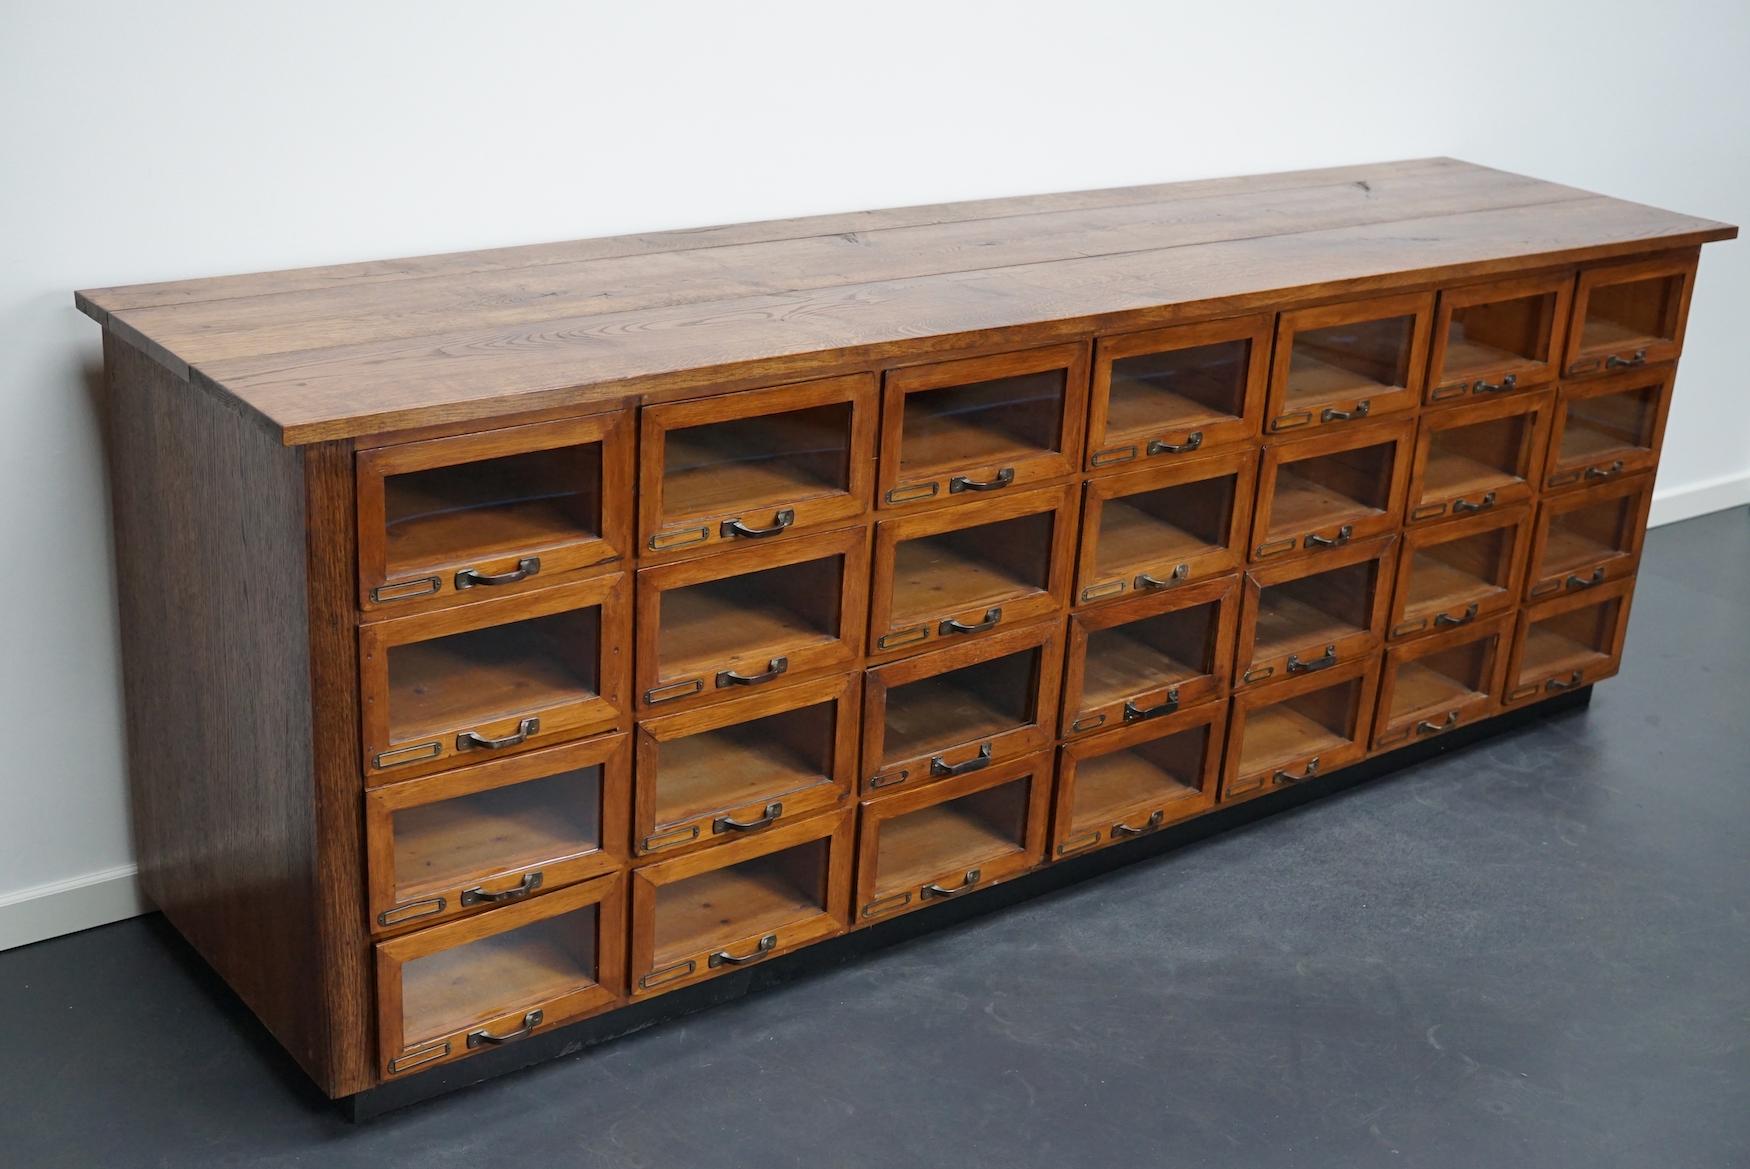 This haberdashery cabinet was produced during the 1930s in the Netherlands. This piece features 28 drawers with ply oak / glass fronts and brass hardware. It was originally used in a shop for sewing supplies and fabrics in Amsterdam. The interior